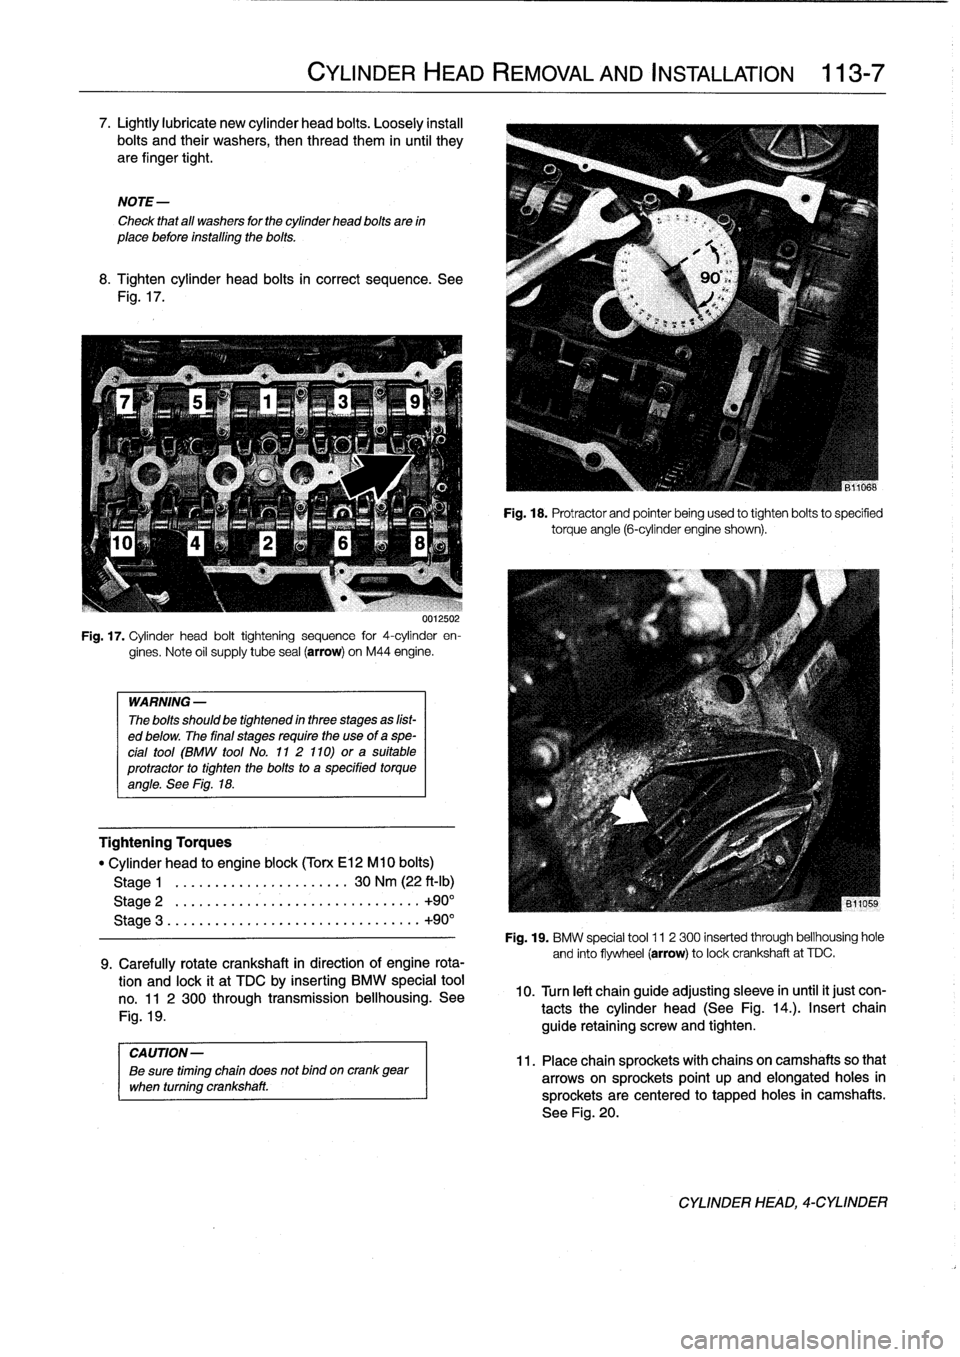 BMW 318i 1992 E36 Workshop Manual 
7
.
Lightly
lubricate
new
cylinder
head
bolts
.
Loosely
instan
bolts
and
their
washers,
then
thread
them
in
until
they
are
finger
tight
.

NOTE-

Check
that
all
washers
for
the
cylinder
head
bolts
ar